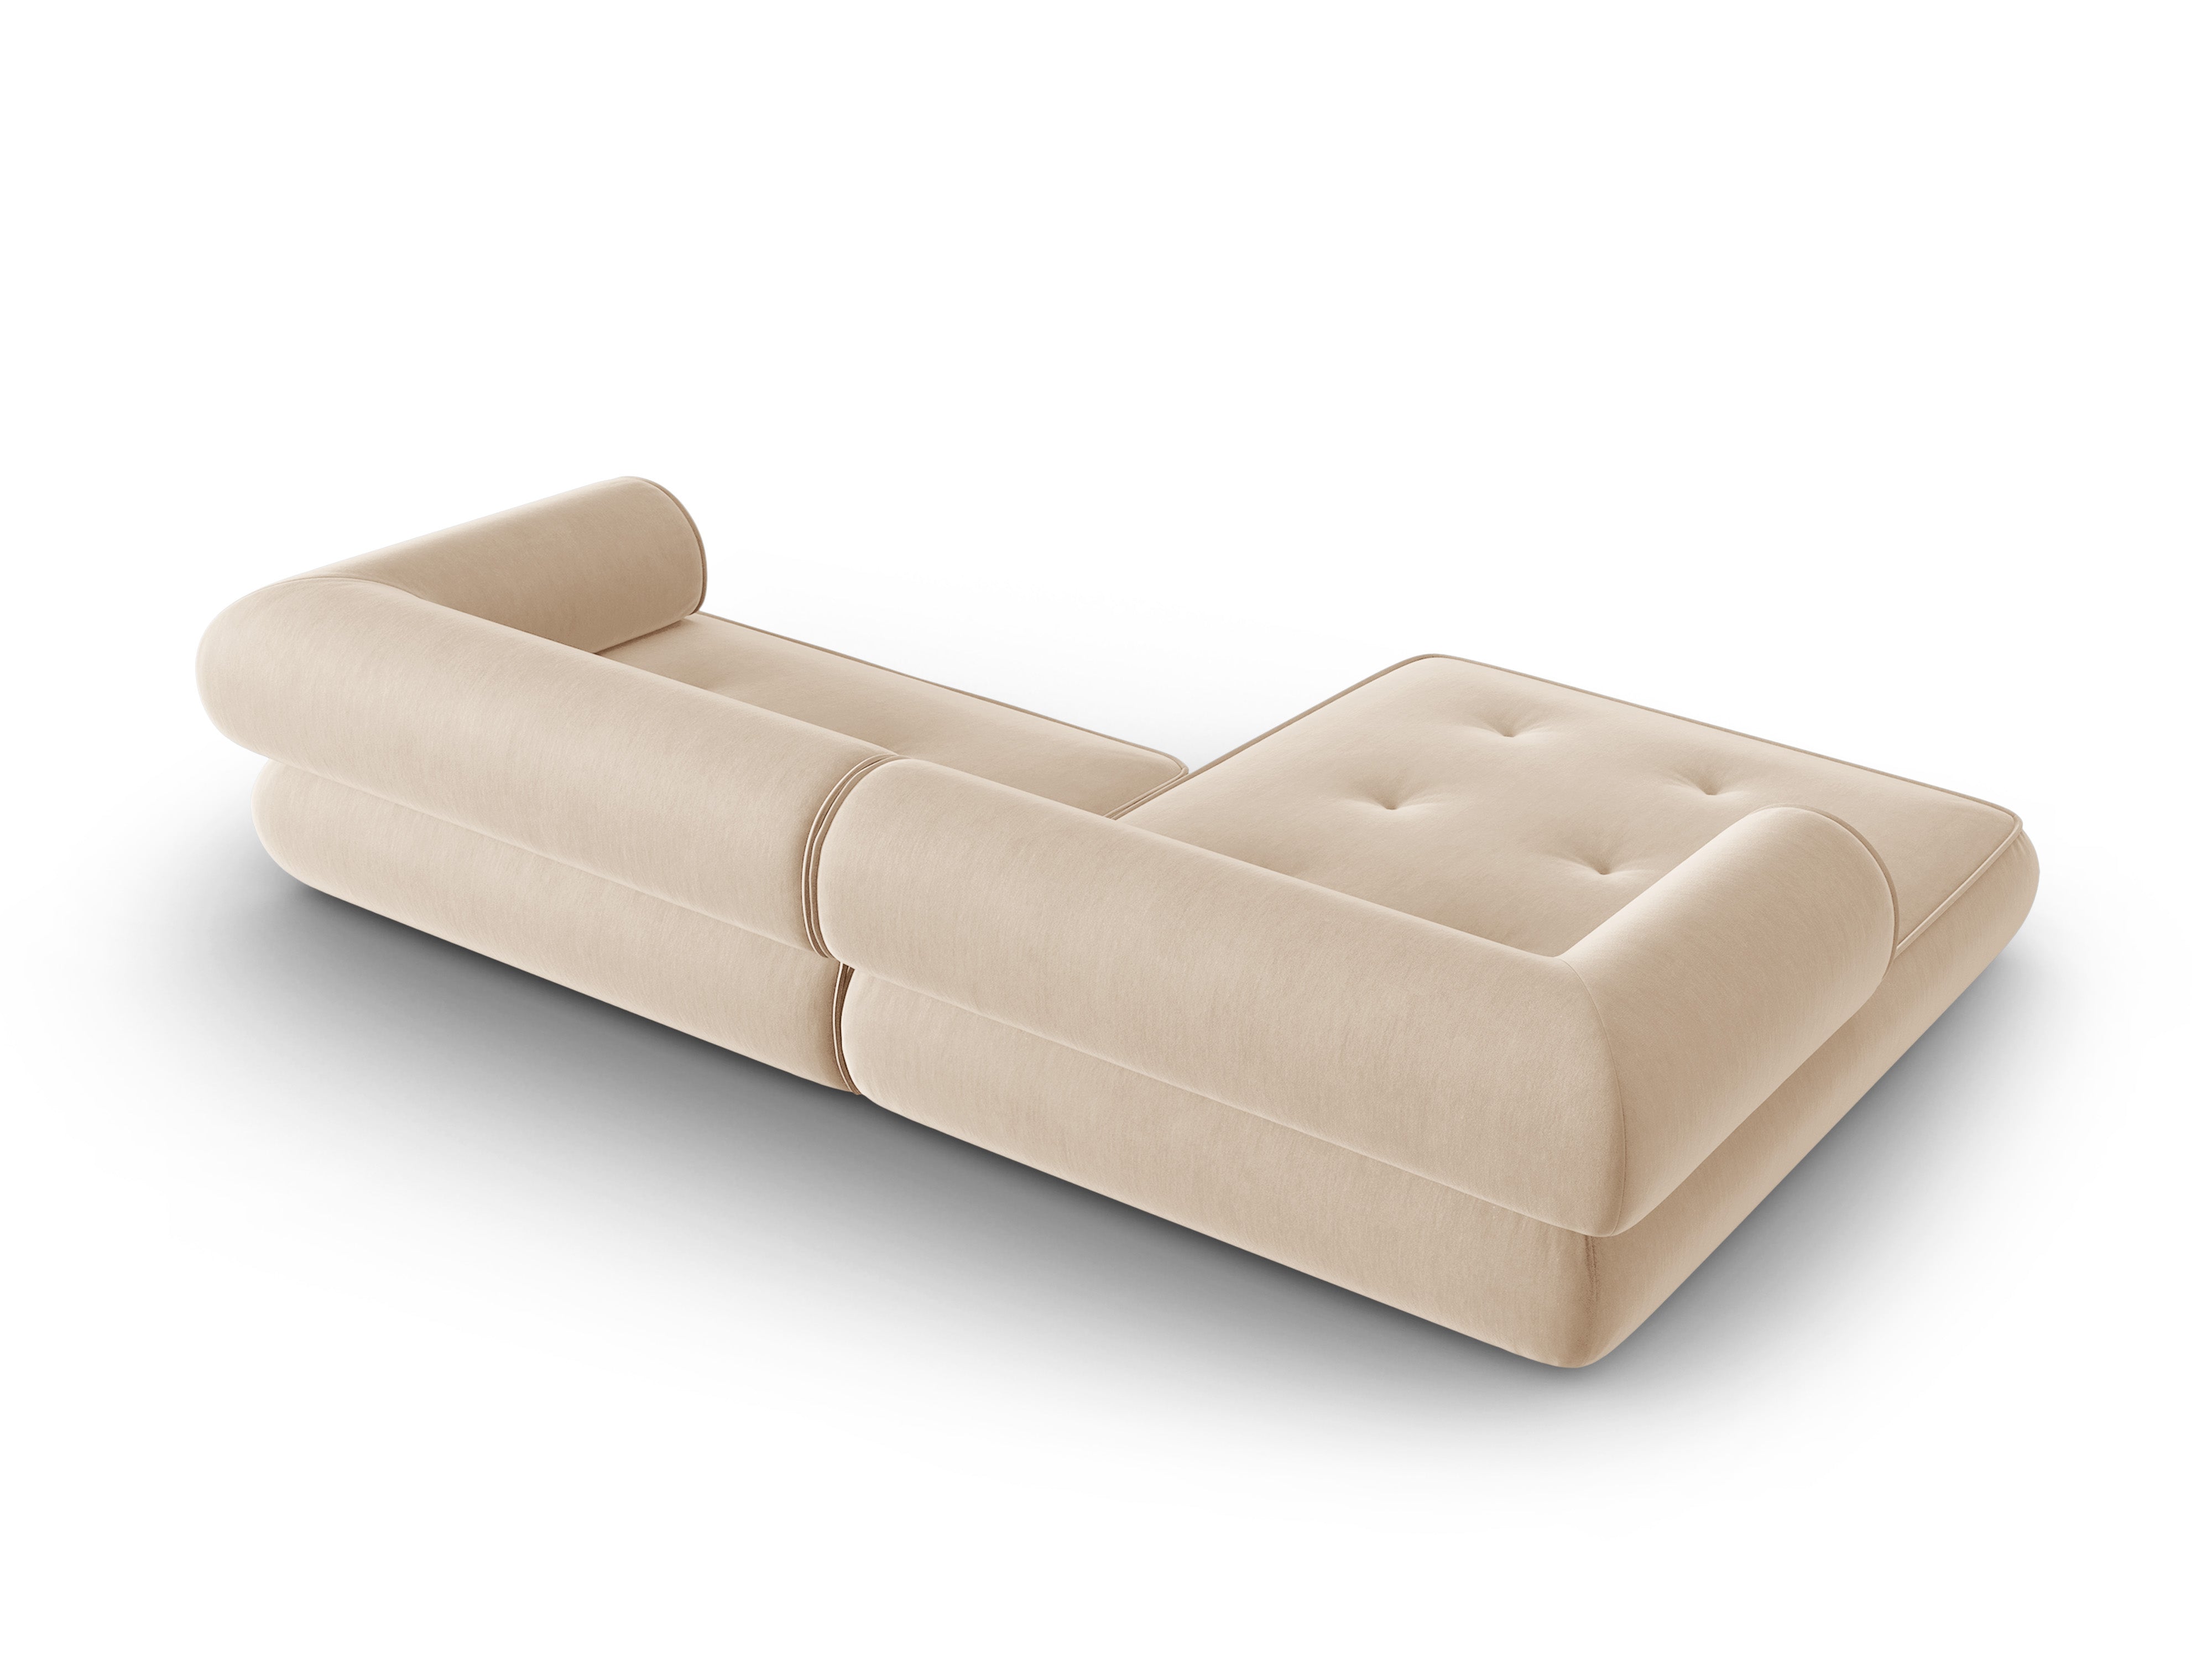 Left Corner Sofa, "Lily", 4 Seats, 261x188x74
 Made in Europe, Maison Heritage, Eye on Design